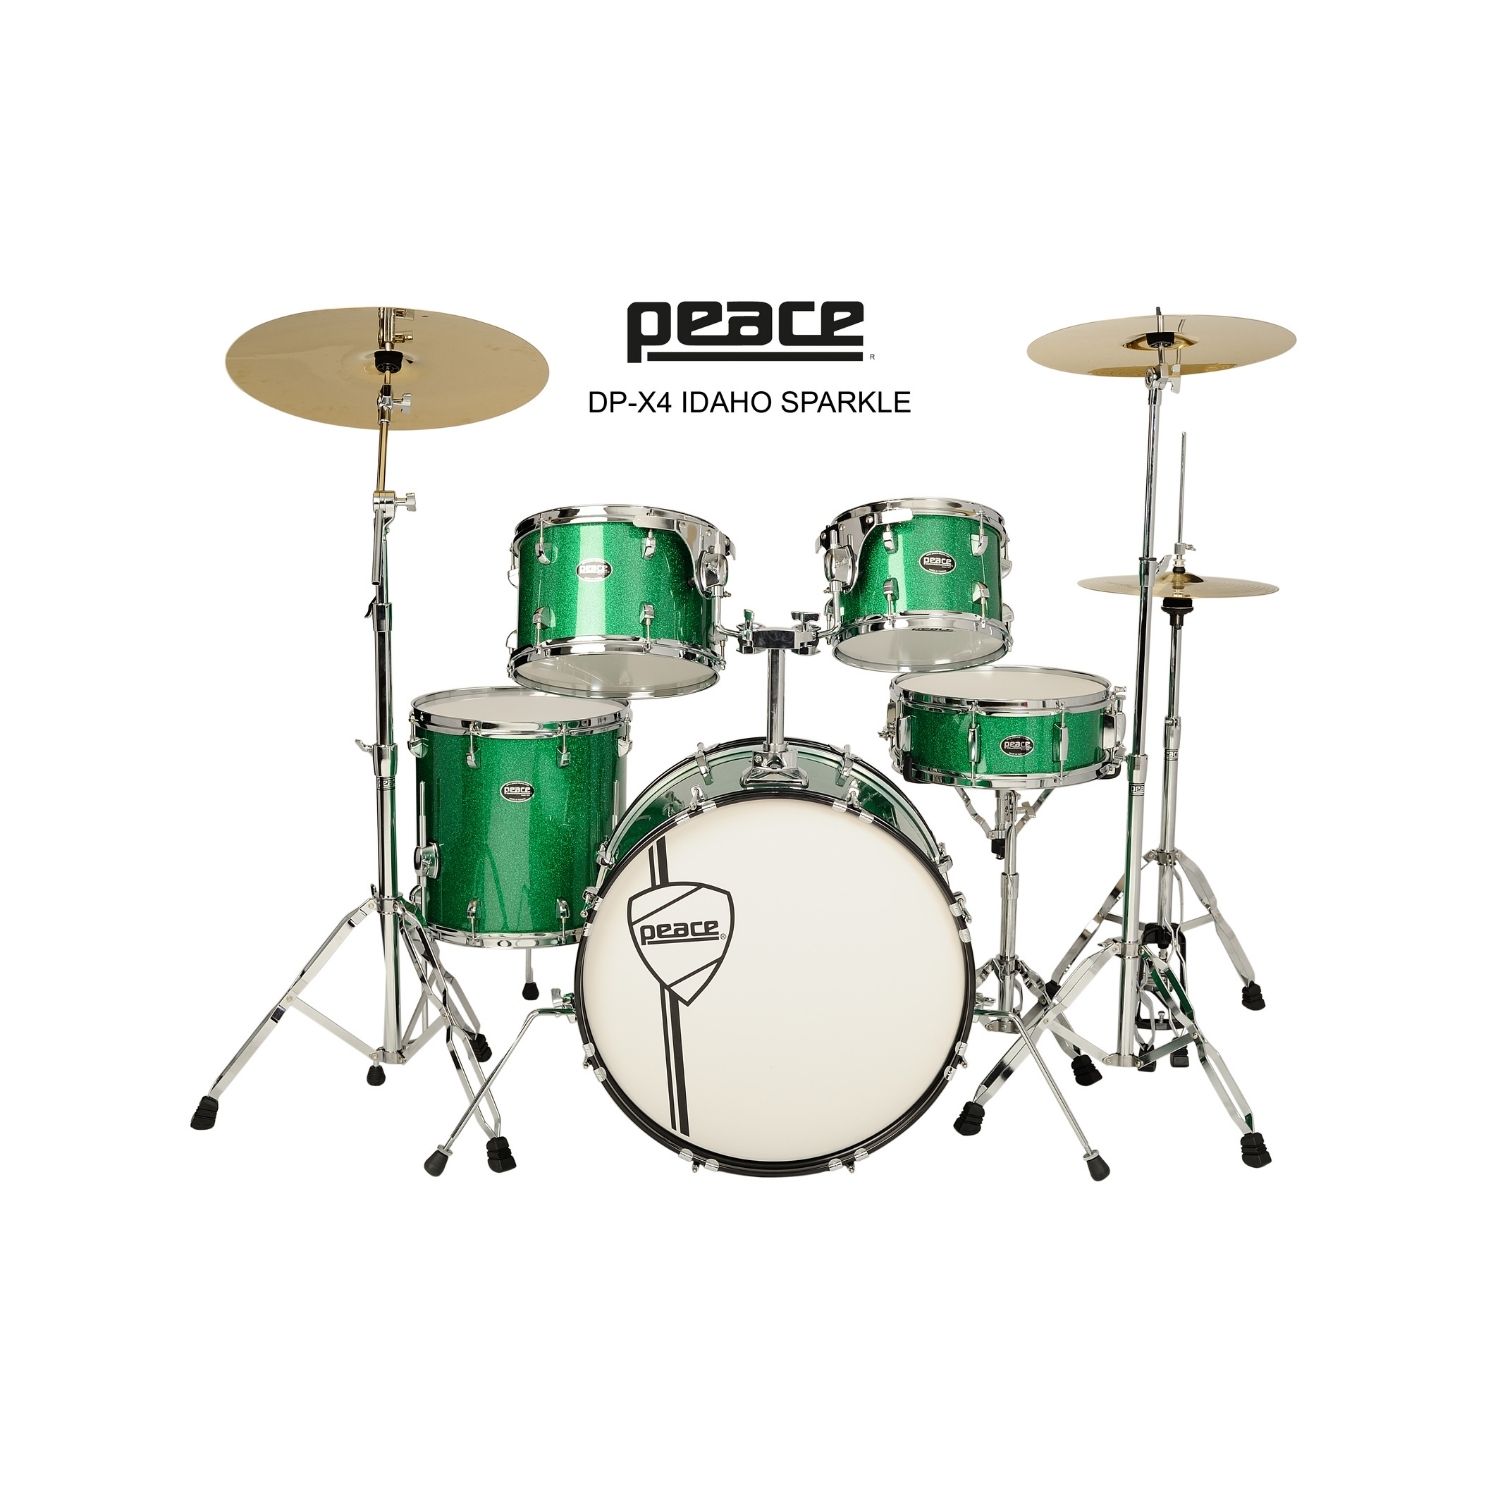 Green color drumset online india